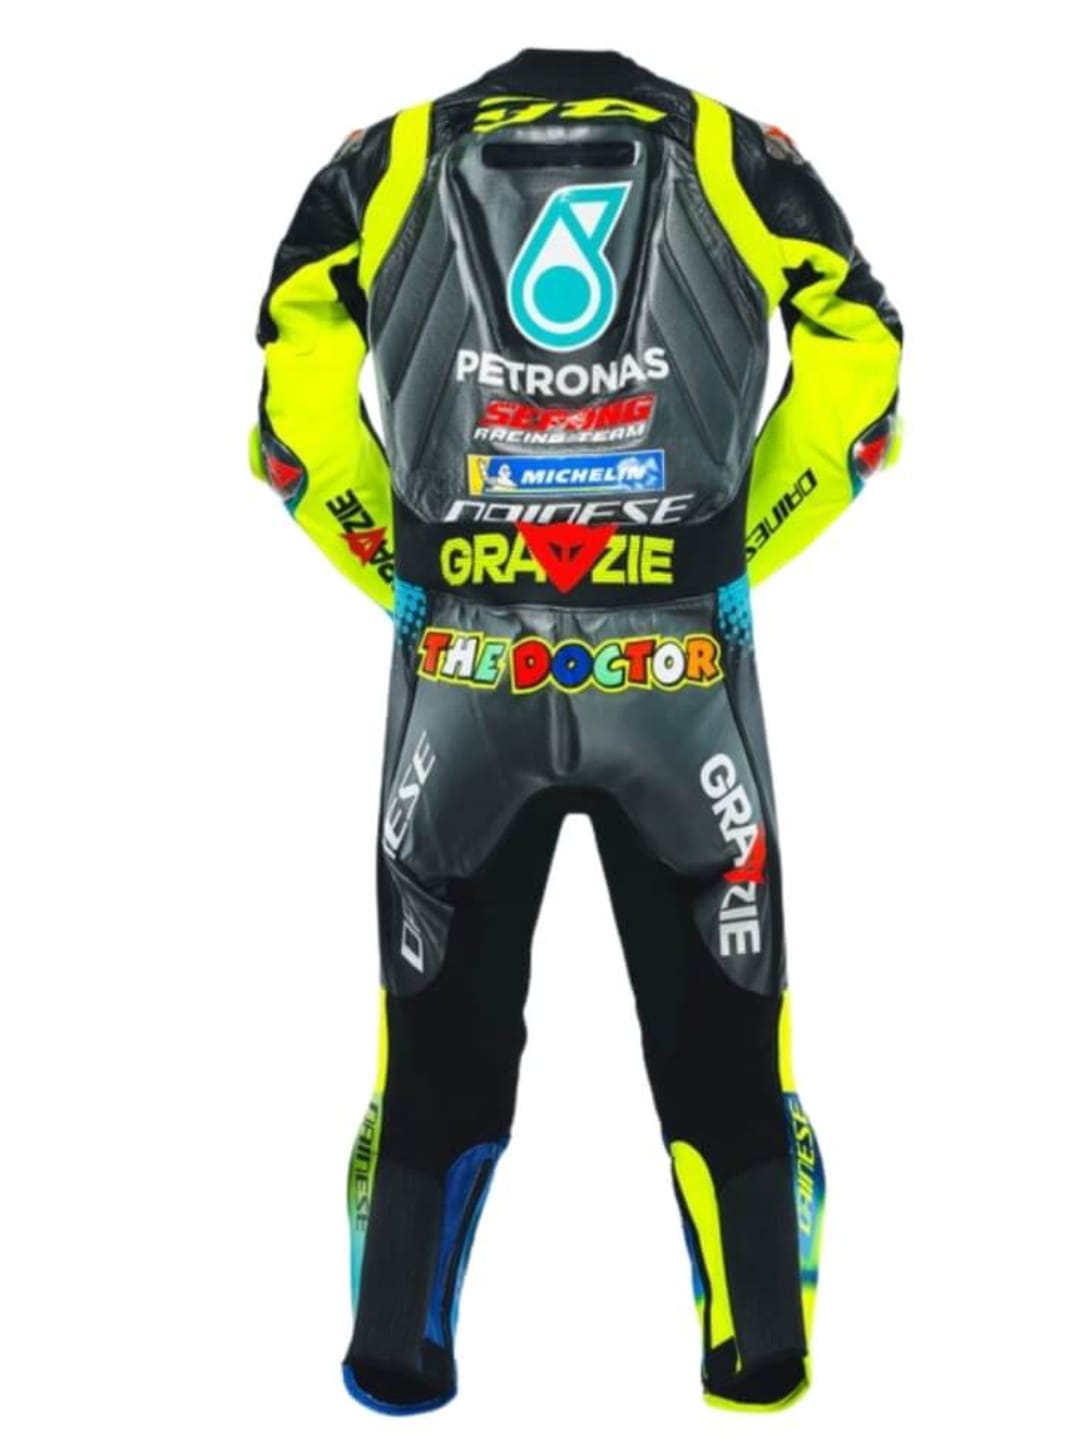 Valentino Rossi Grazie Vale 2021 Motorcycle Leather Riding Suit